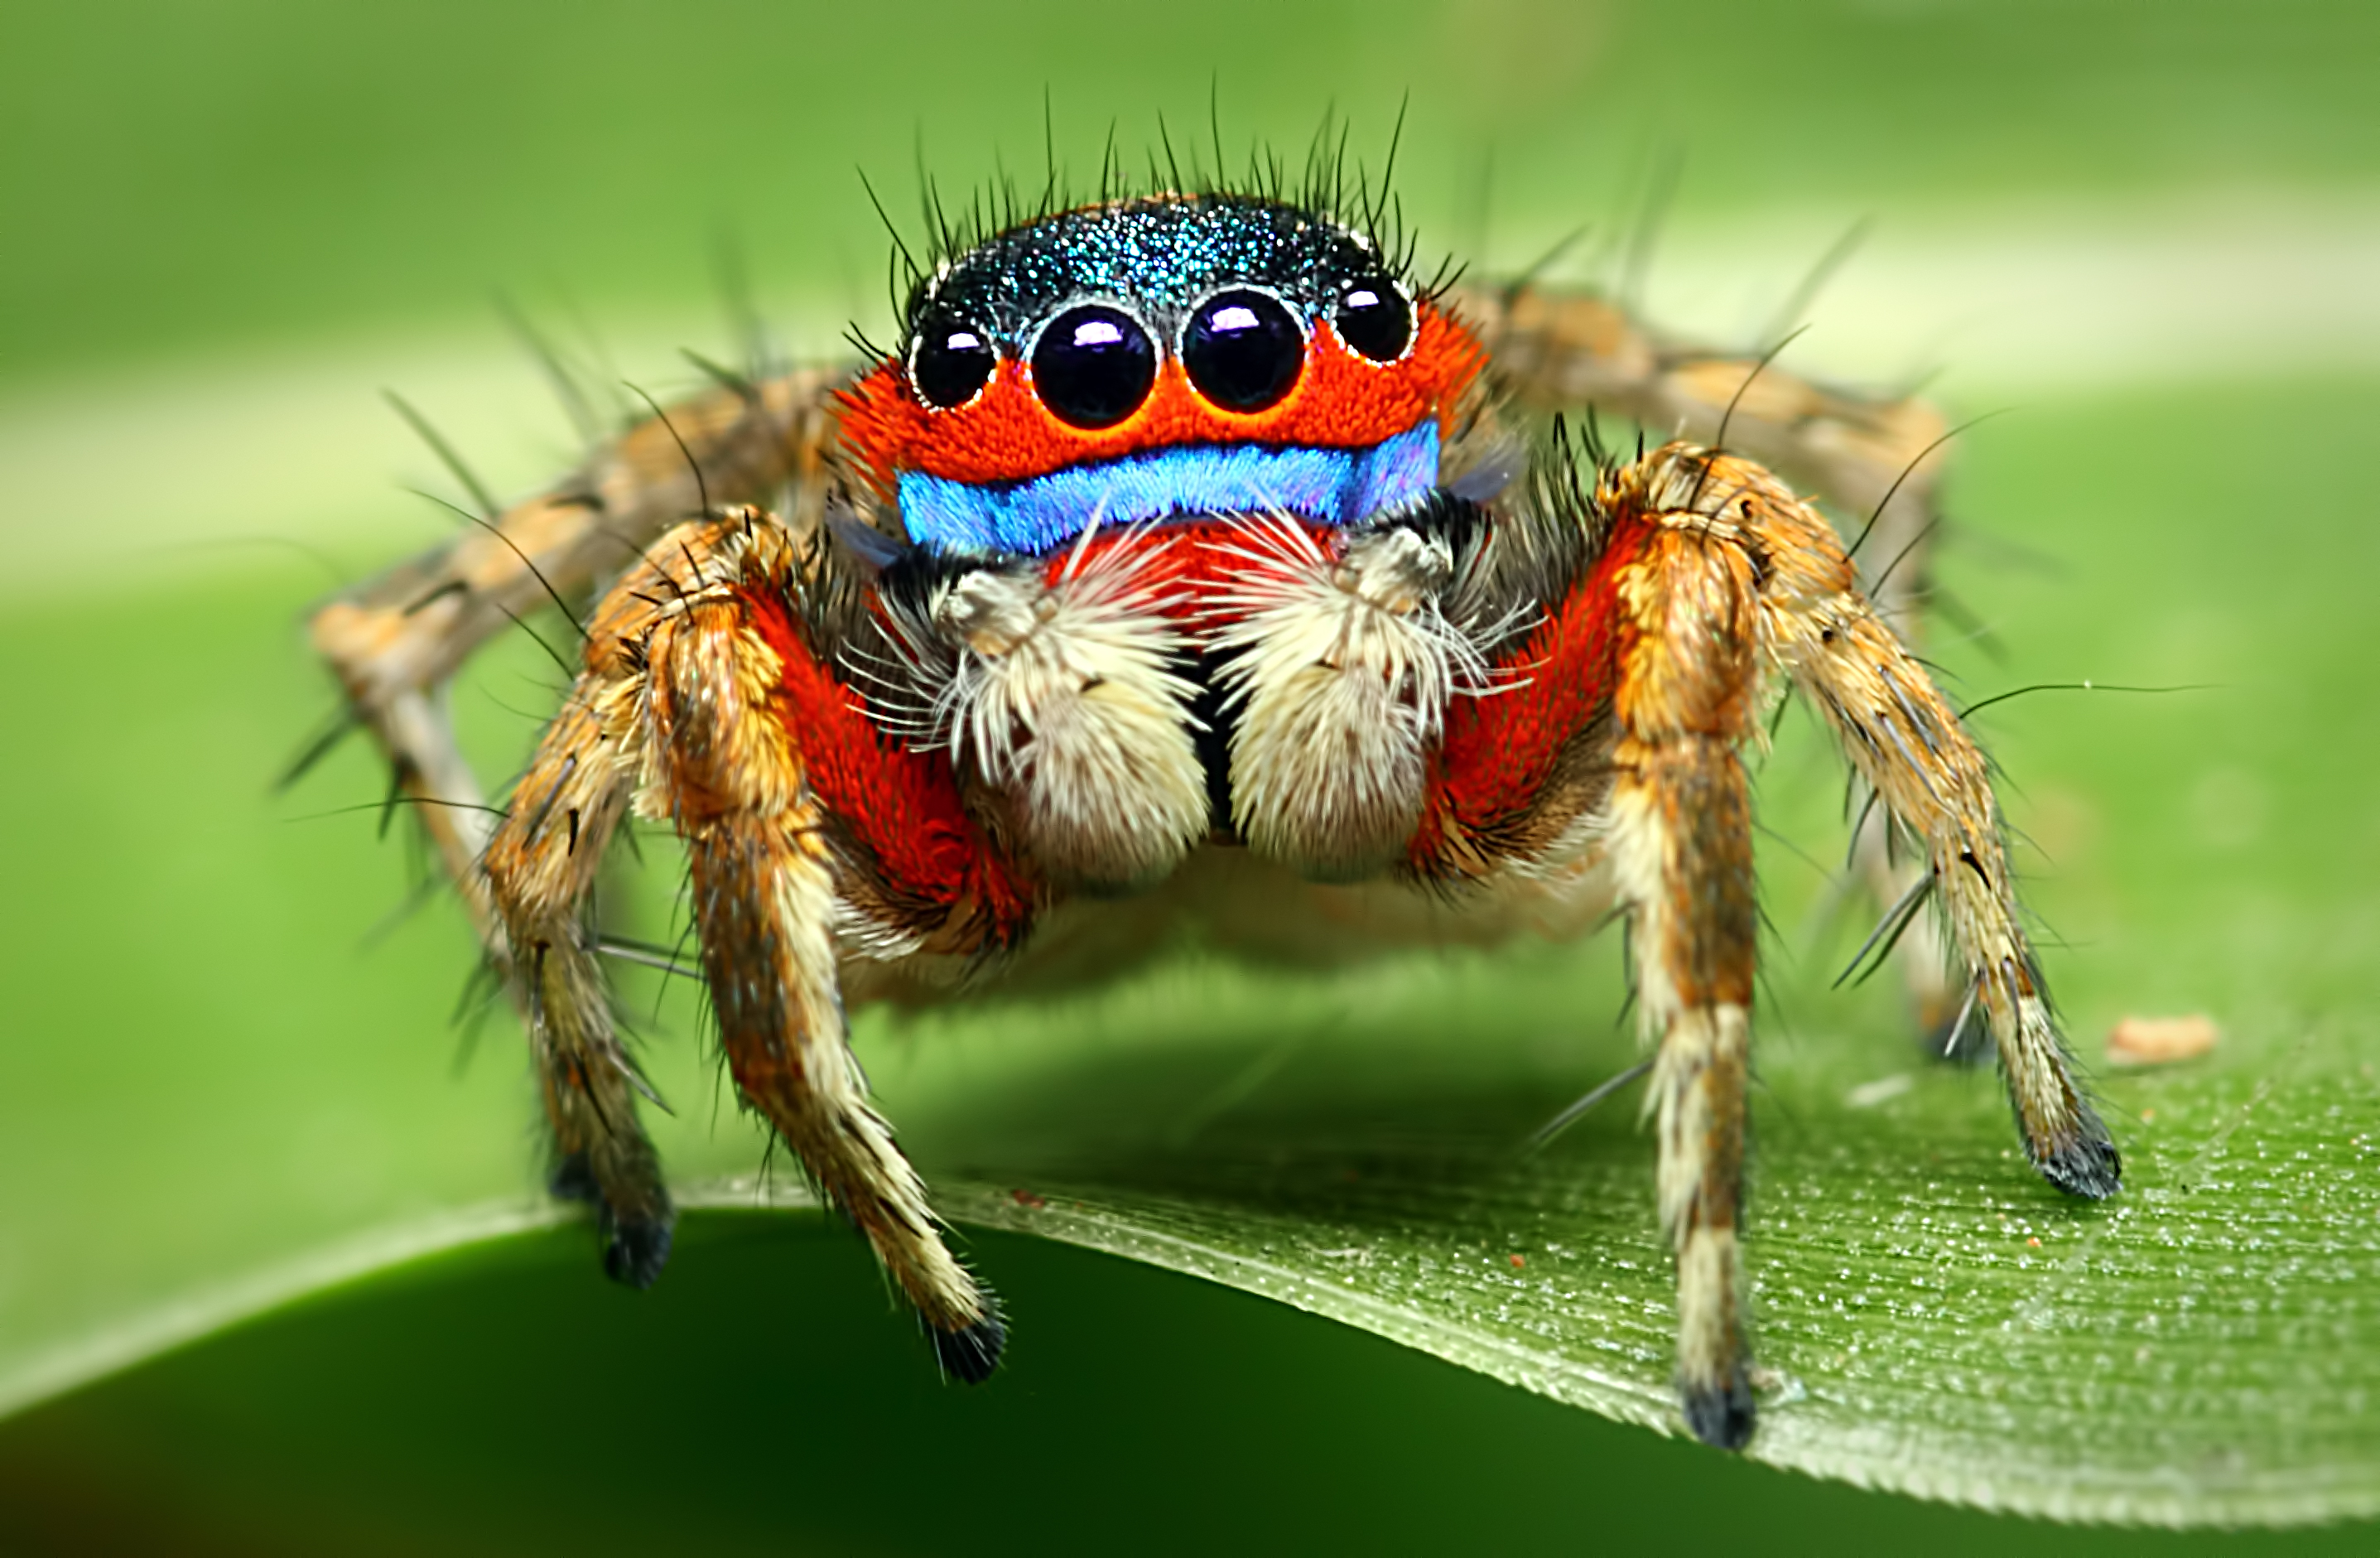 Spiders are much smarter than you think | Ars Technica